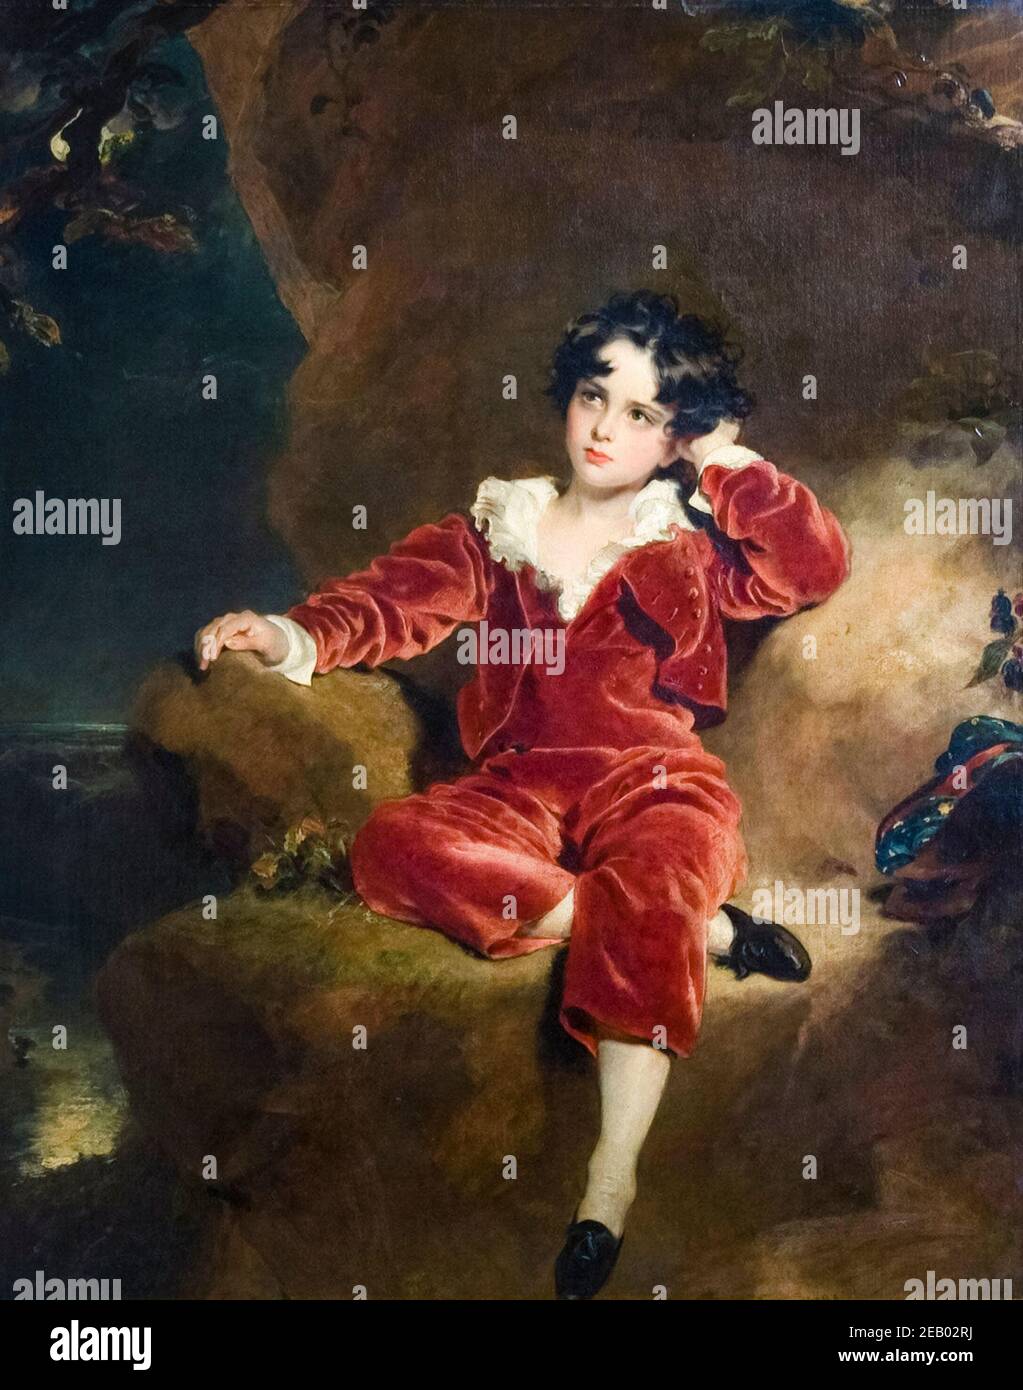 Sir Thomas Lawrence, The Red Boy (Master Charles William Lambton), portrait painting, 1825 Stock Photo